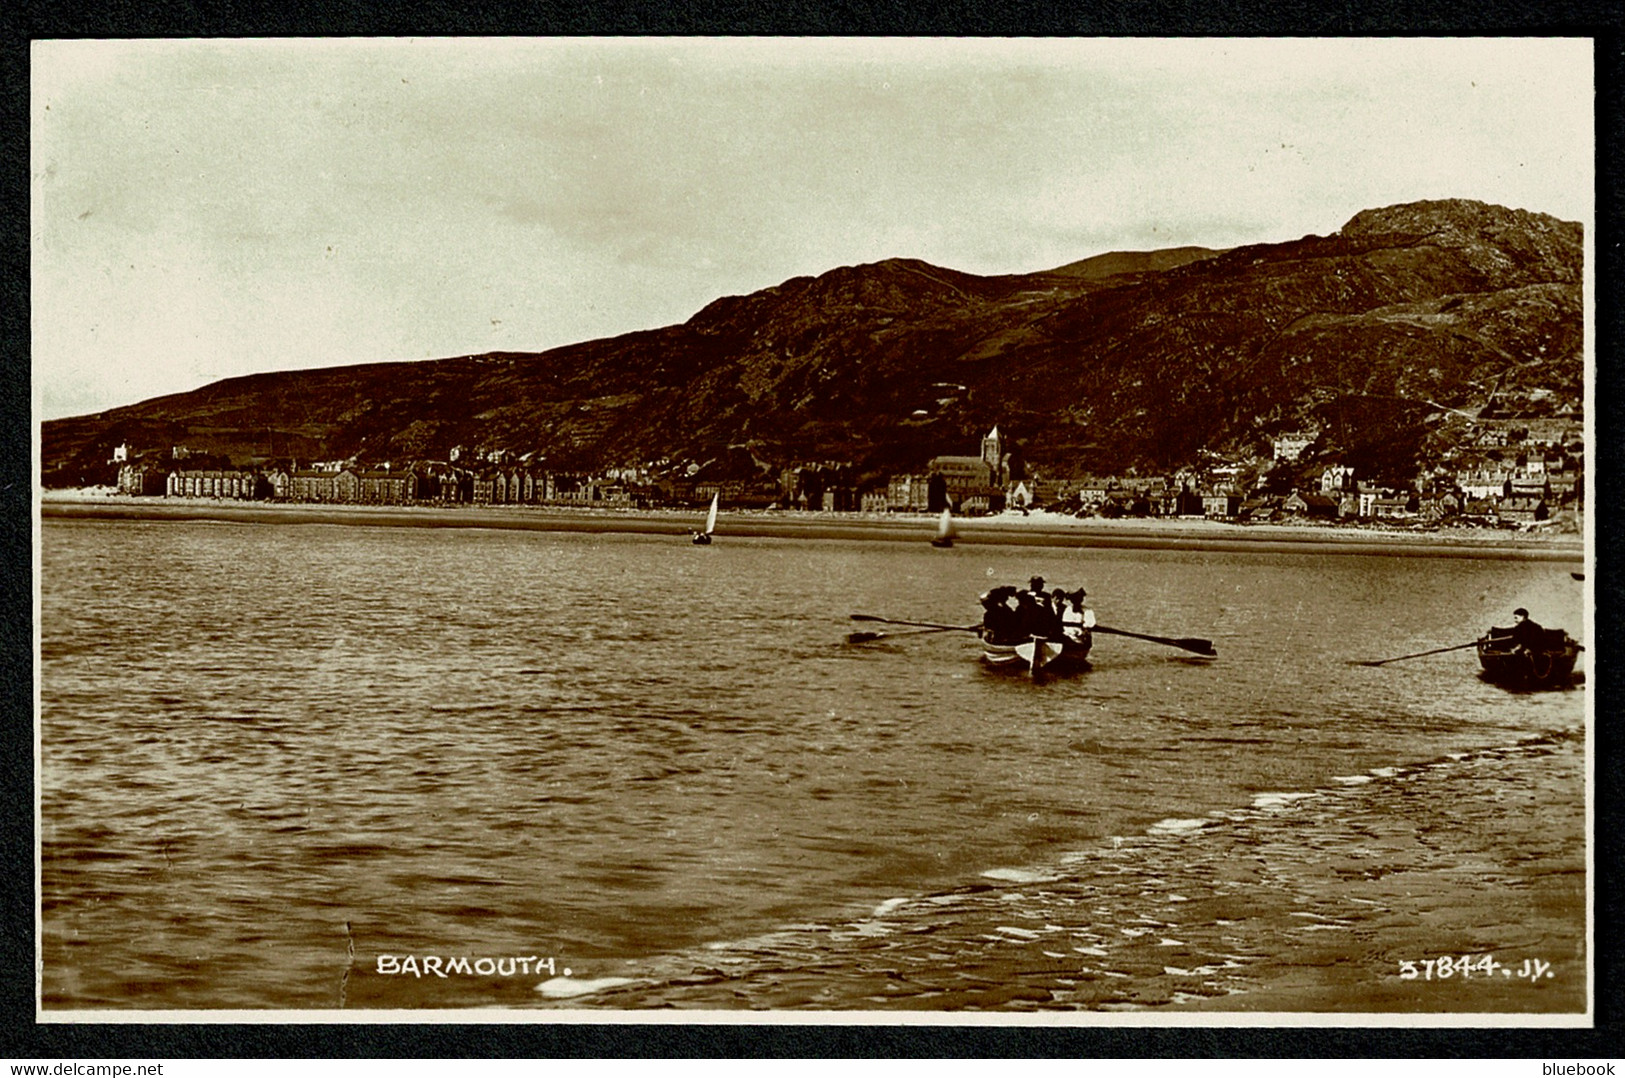 Ref 1578 - Real Photo Postcard - Barmouth Merionethshire Wales - Merionethshire